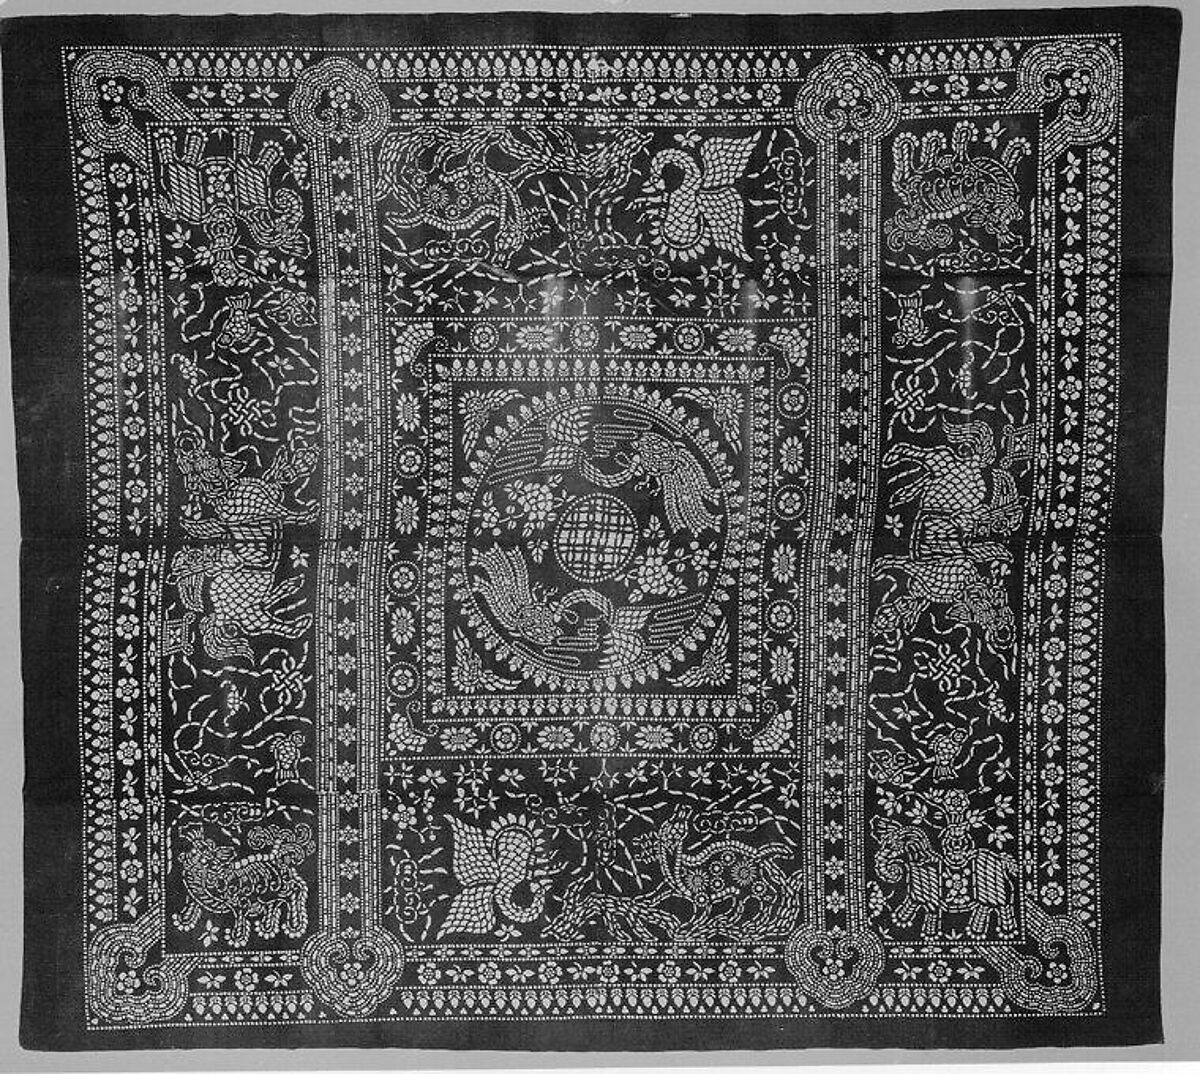 Coverlet, Cotton, China 